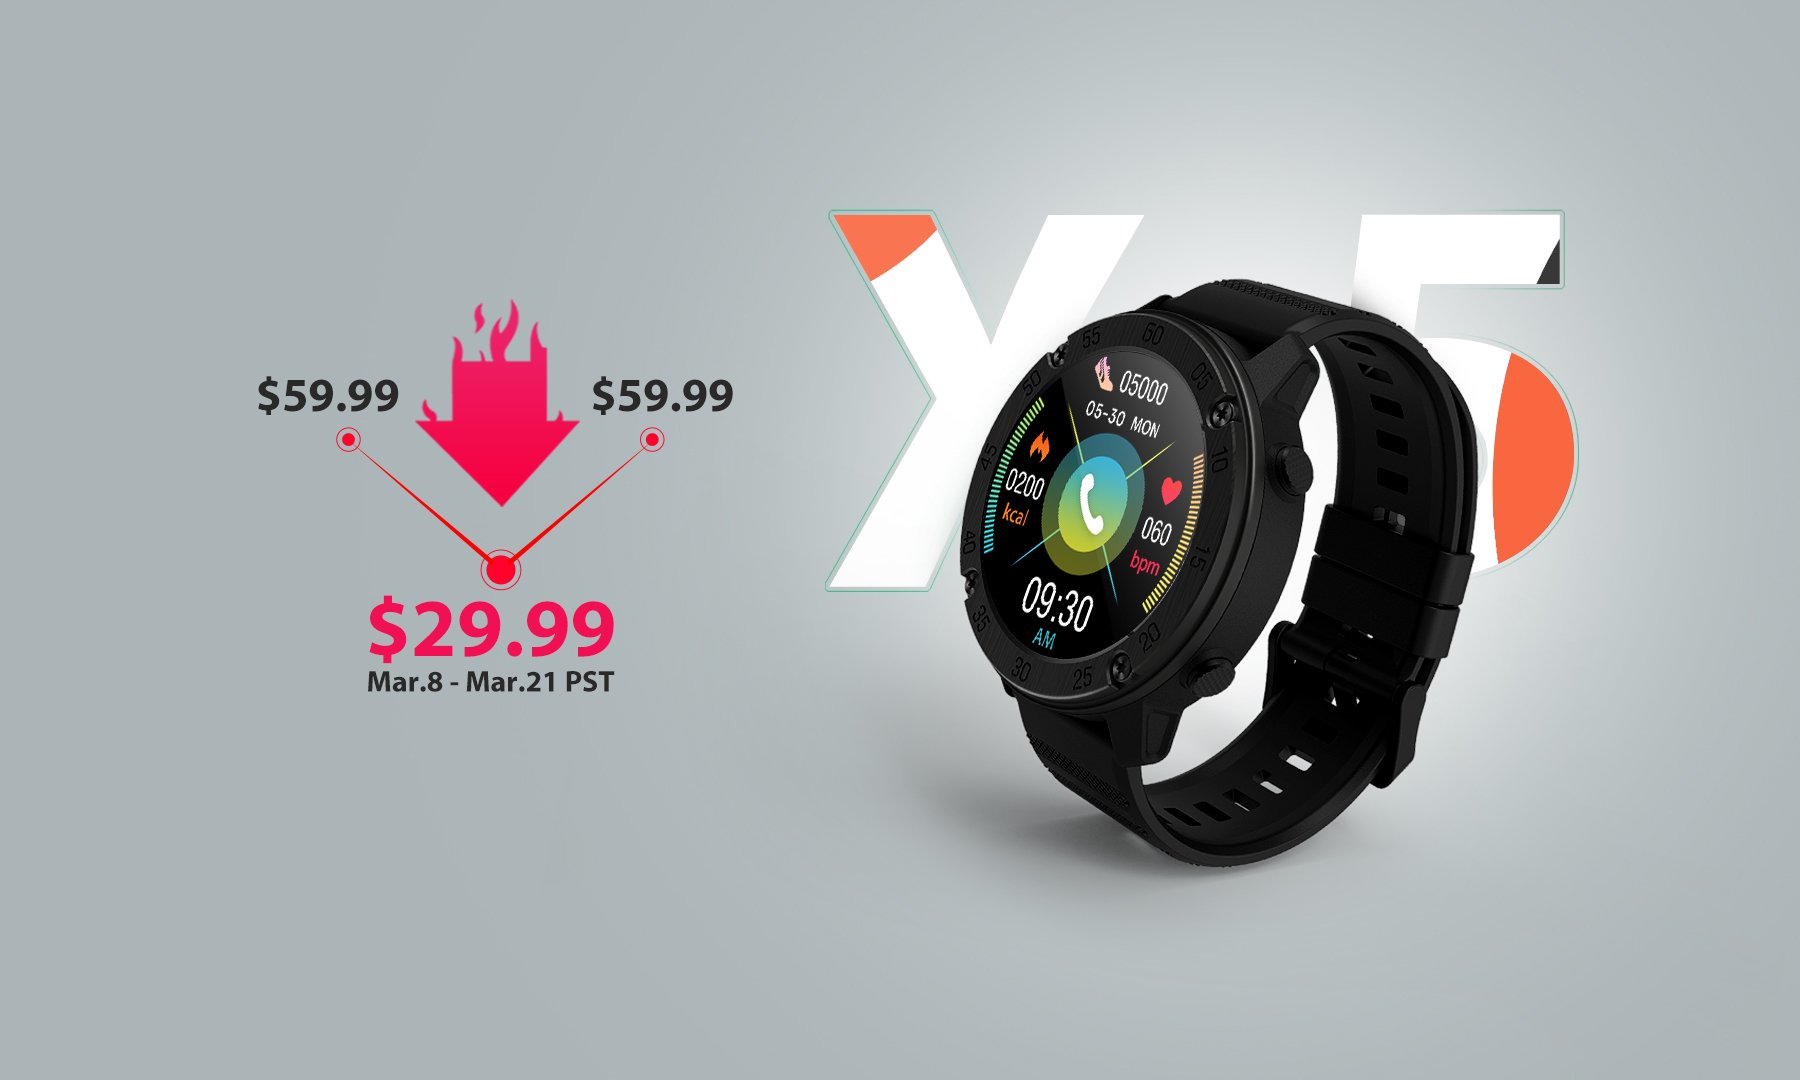 Blackview X5 smartwatch launched with 1.3″ round display for $29.99